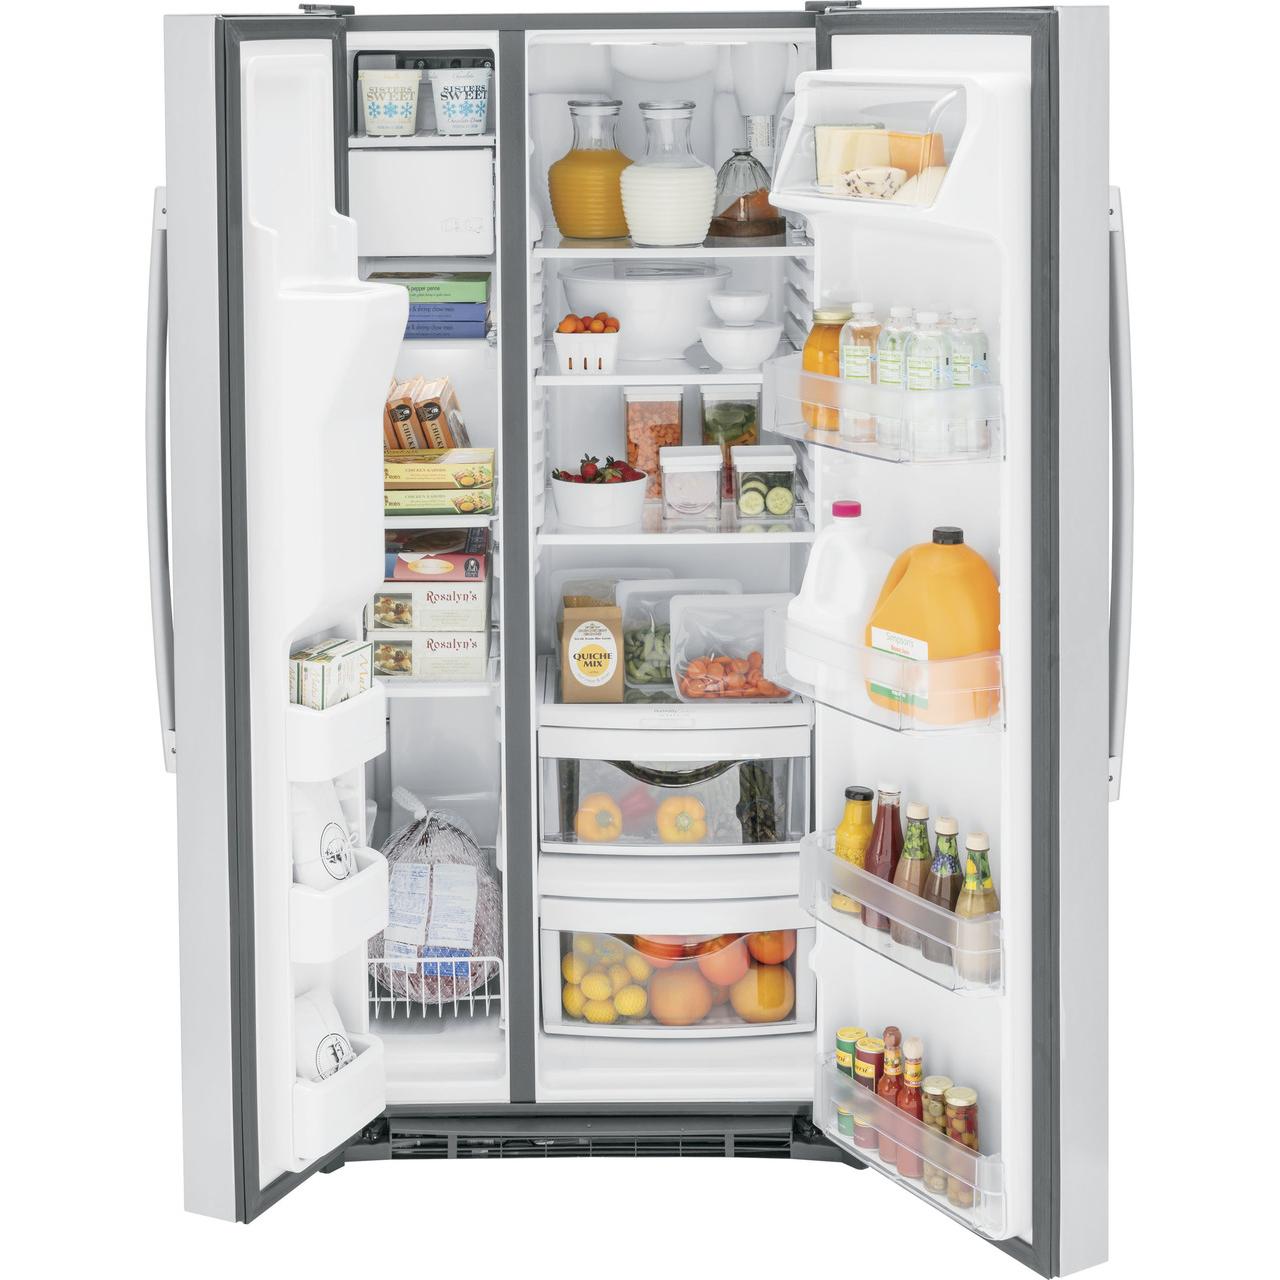 GE 33-inch 23 cu.ft. Freestanding Side-by-Side Refrigerator with LED Lighting GSE23GYPFS